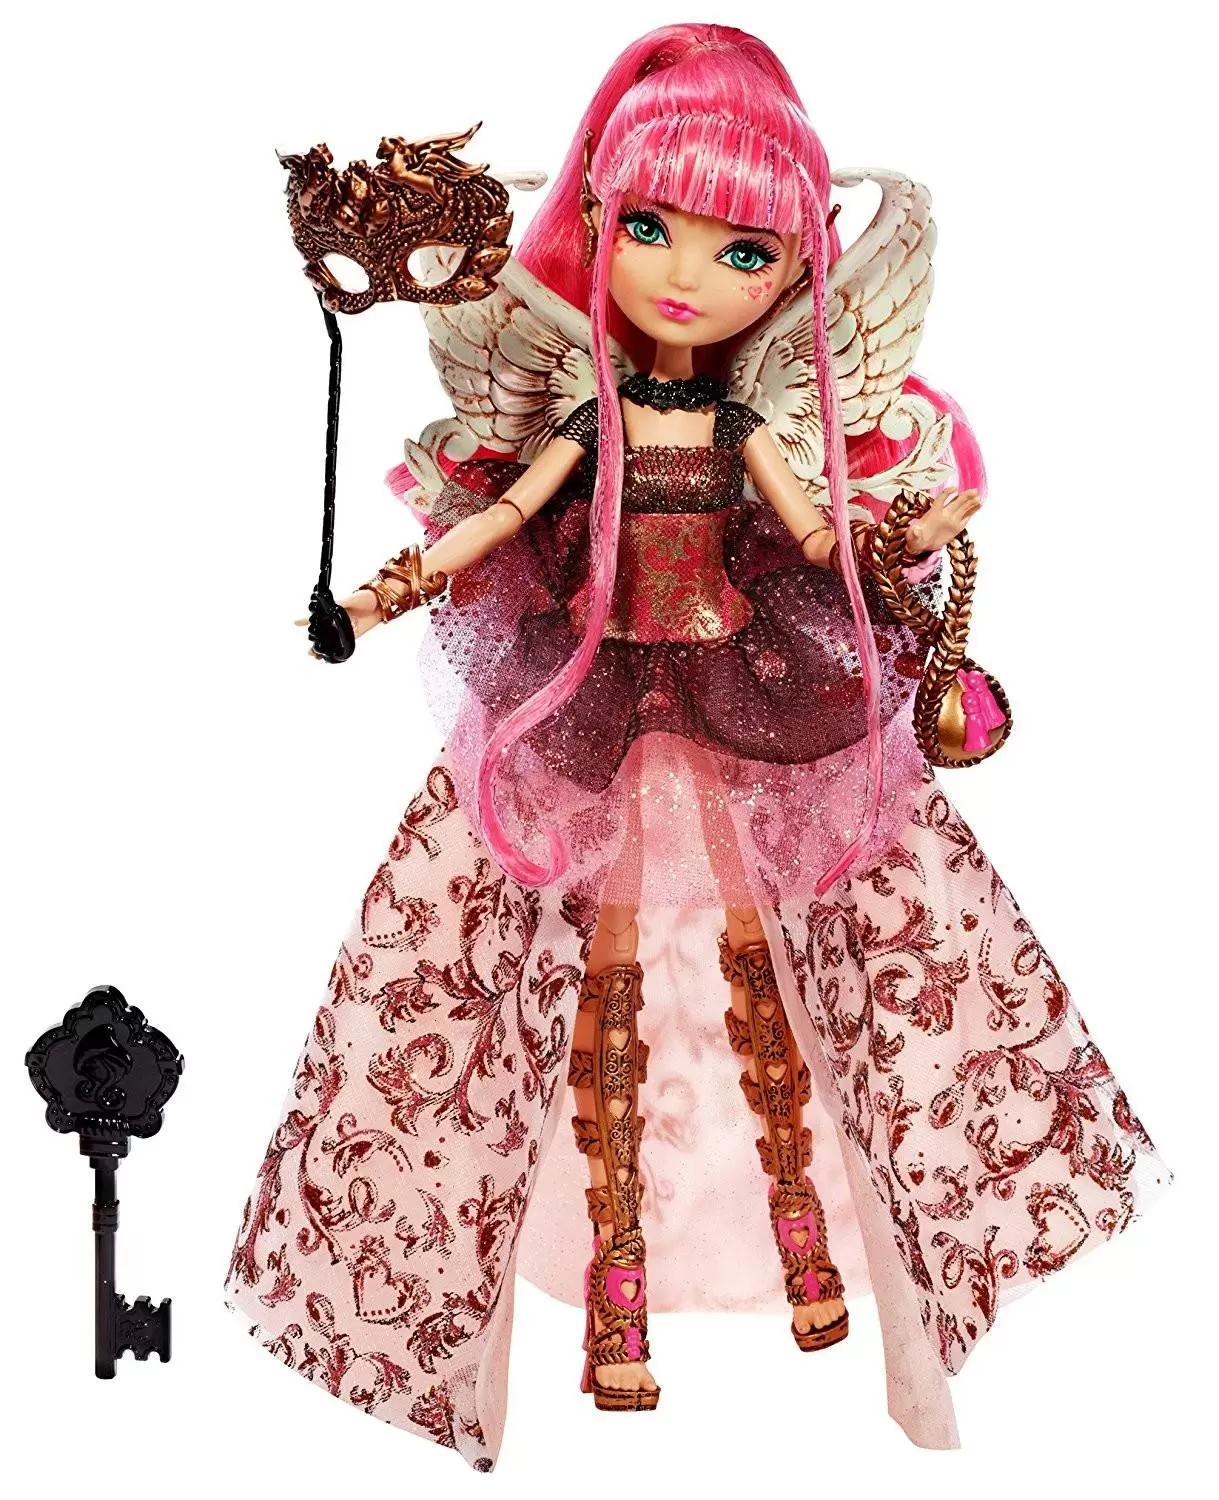 C.A. Cupid and Dexter Charming Ever After High Dolls